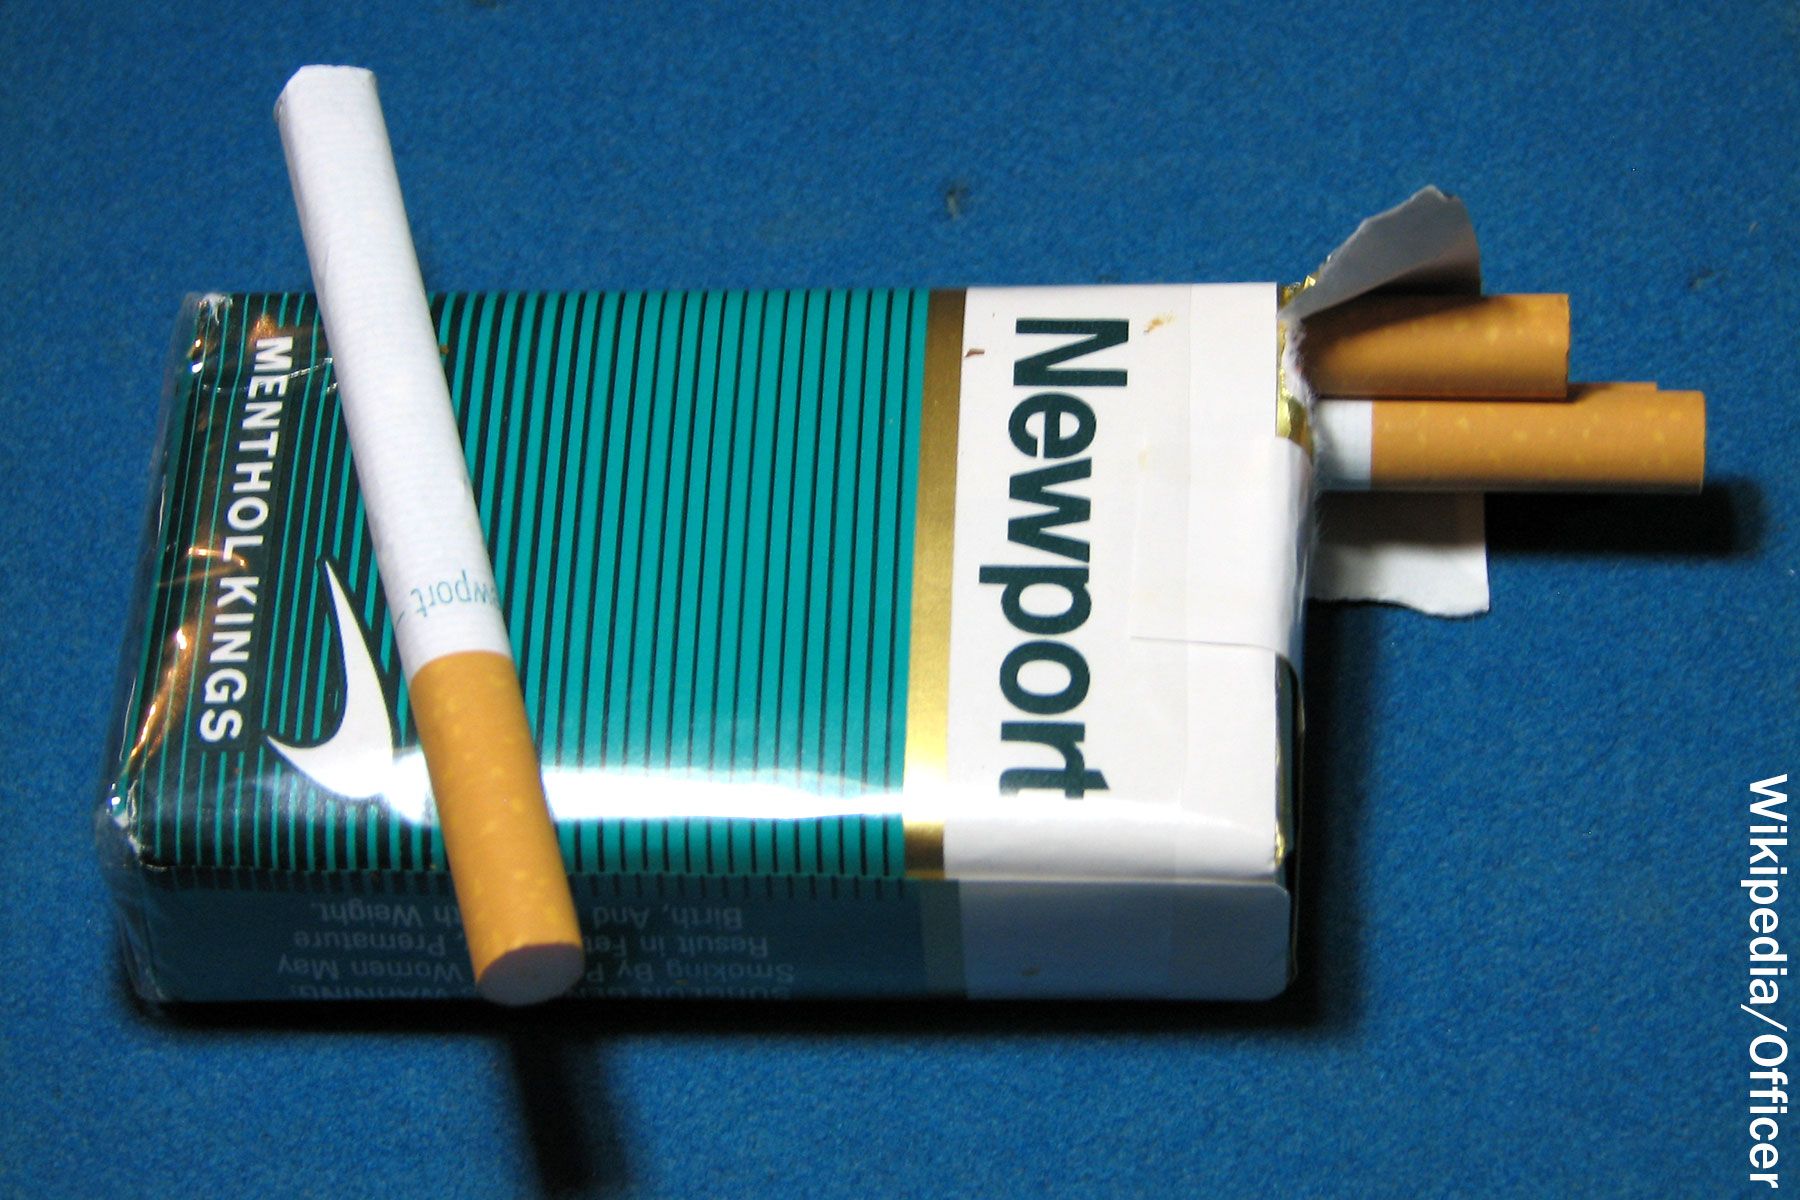 FDA Proposes Ban on Menthol Tobacco Products